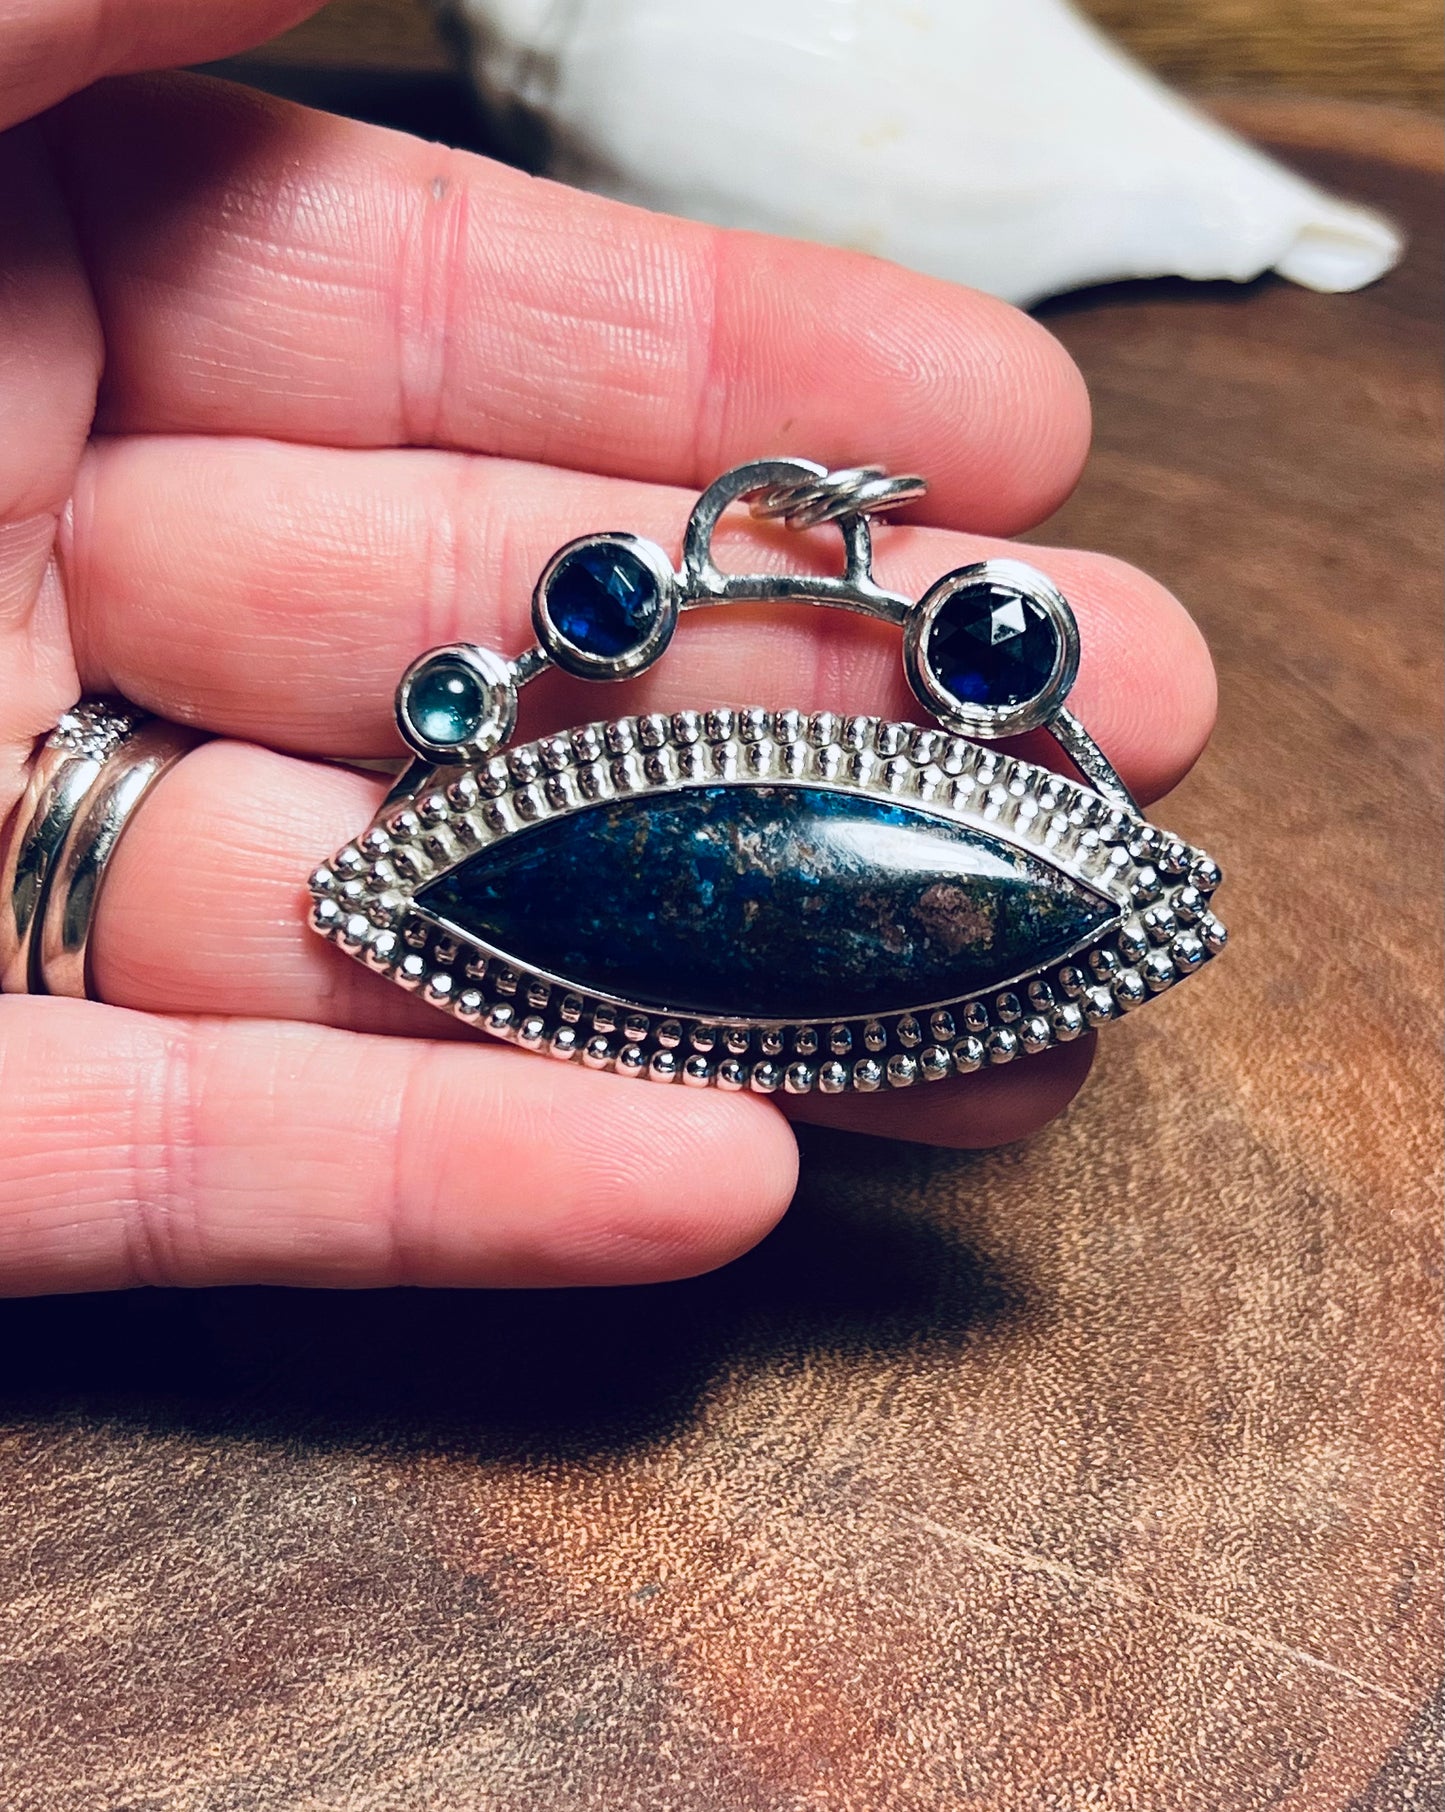 Shattuckite with Blue Kyanite and Neon Apatite Sterling Silver Pendant